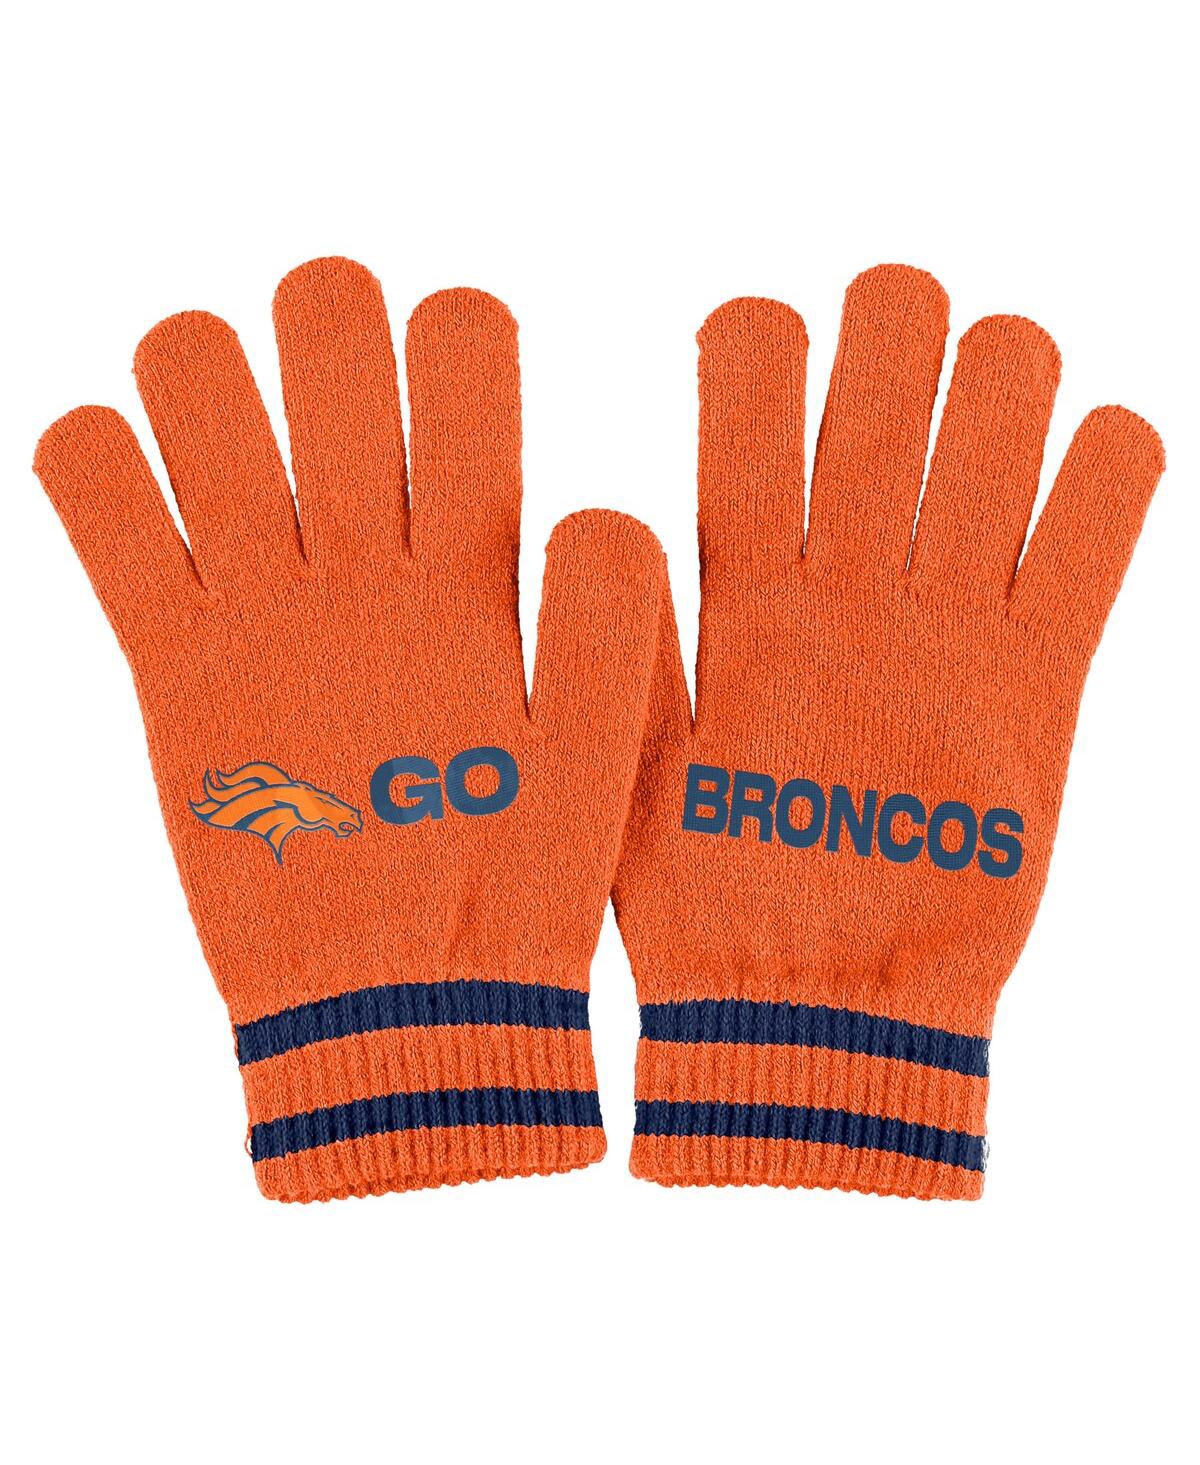 Shop Wear By Erin Andrews Women's  Orange Denver Broncos Double Jacquard Cuffed Knit Hat With Pom And Glov